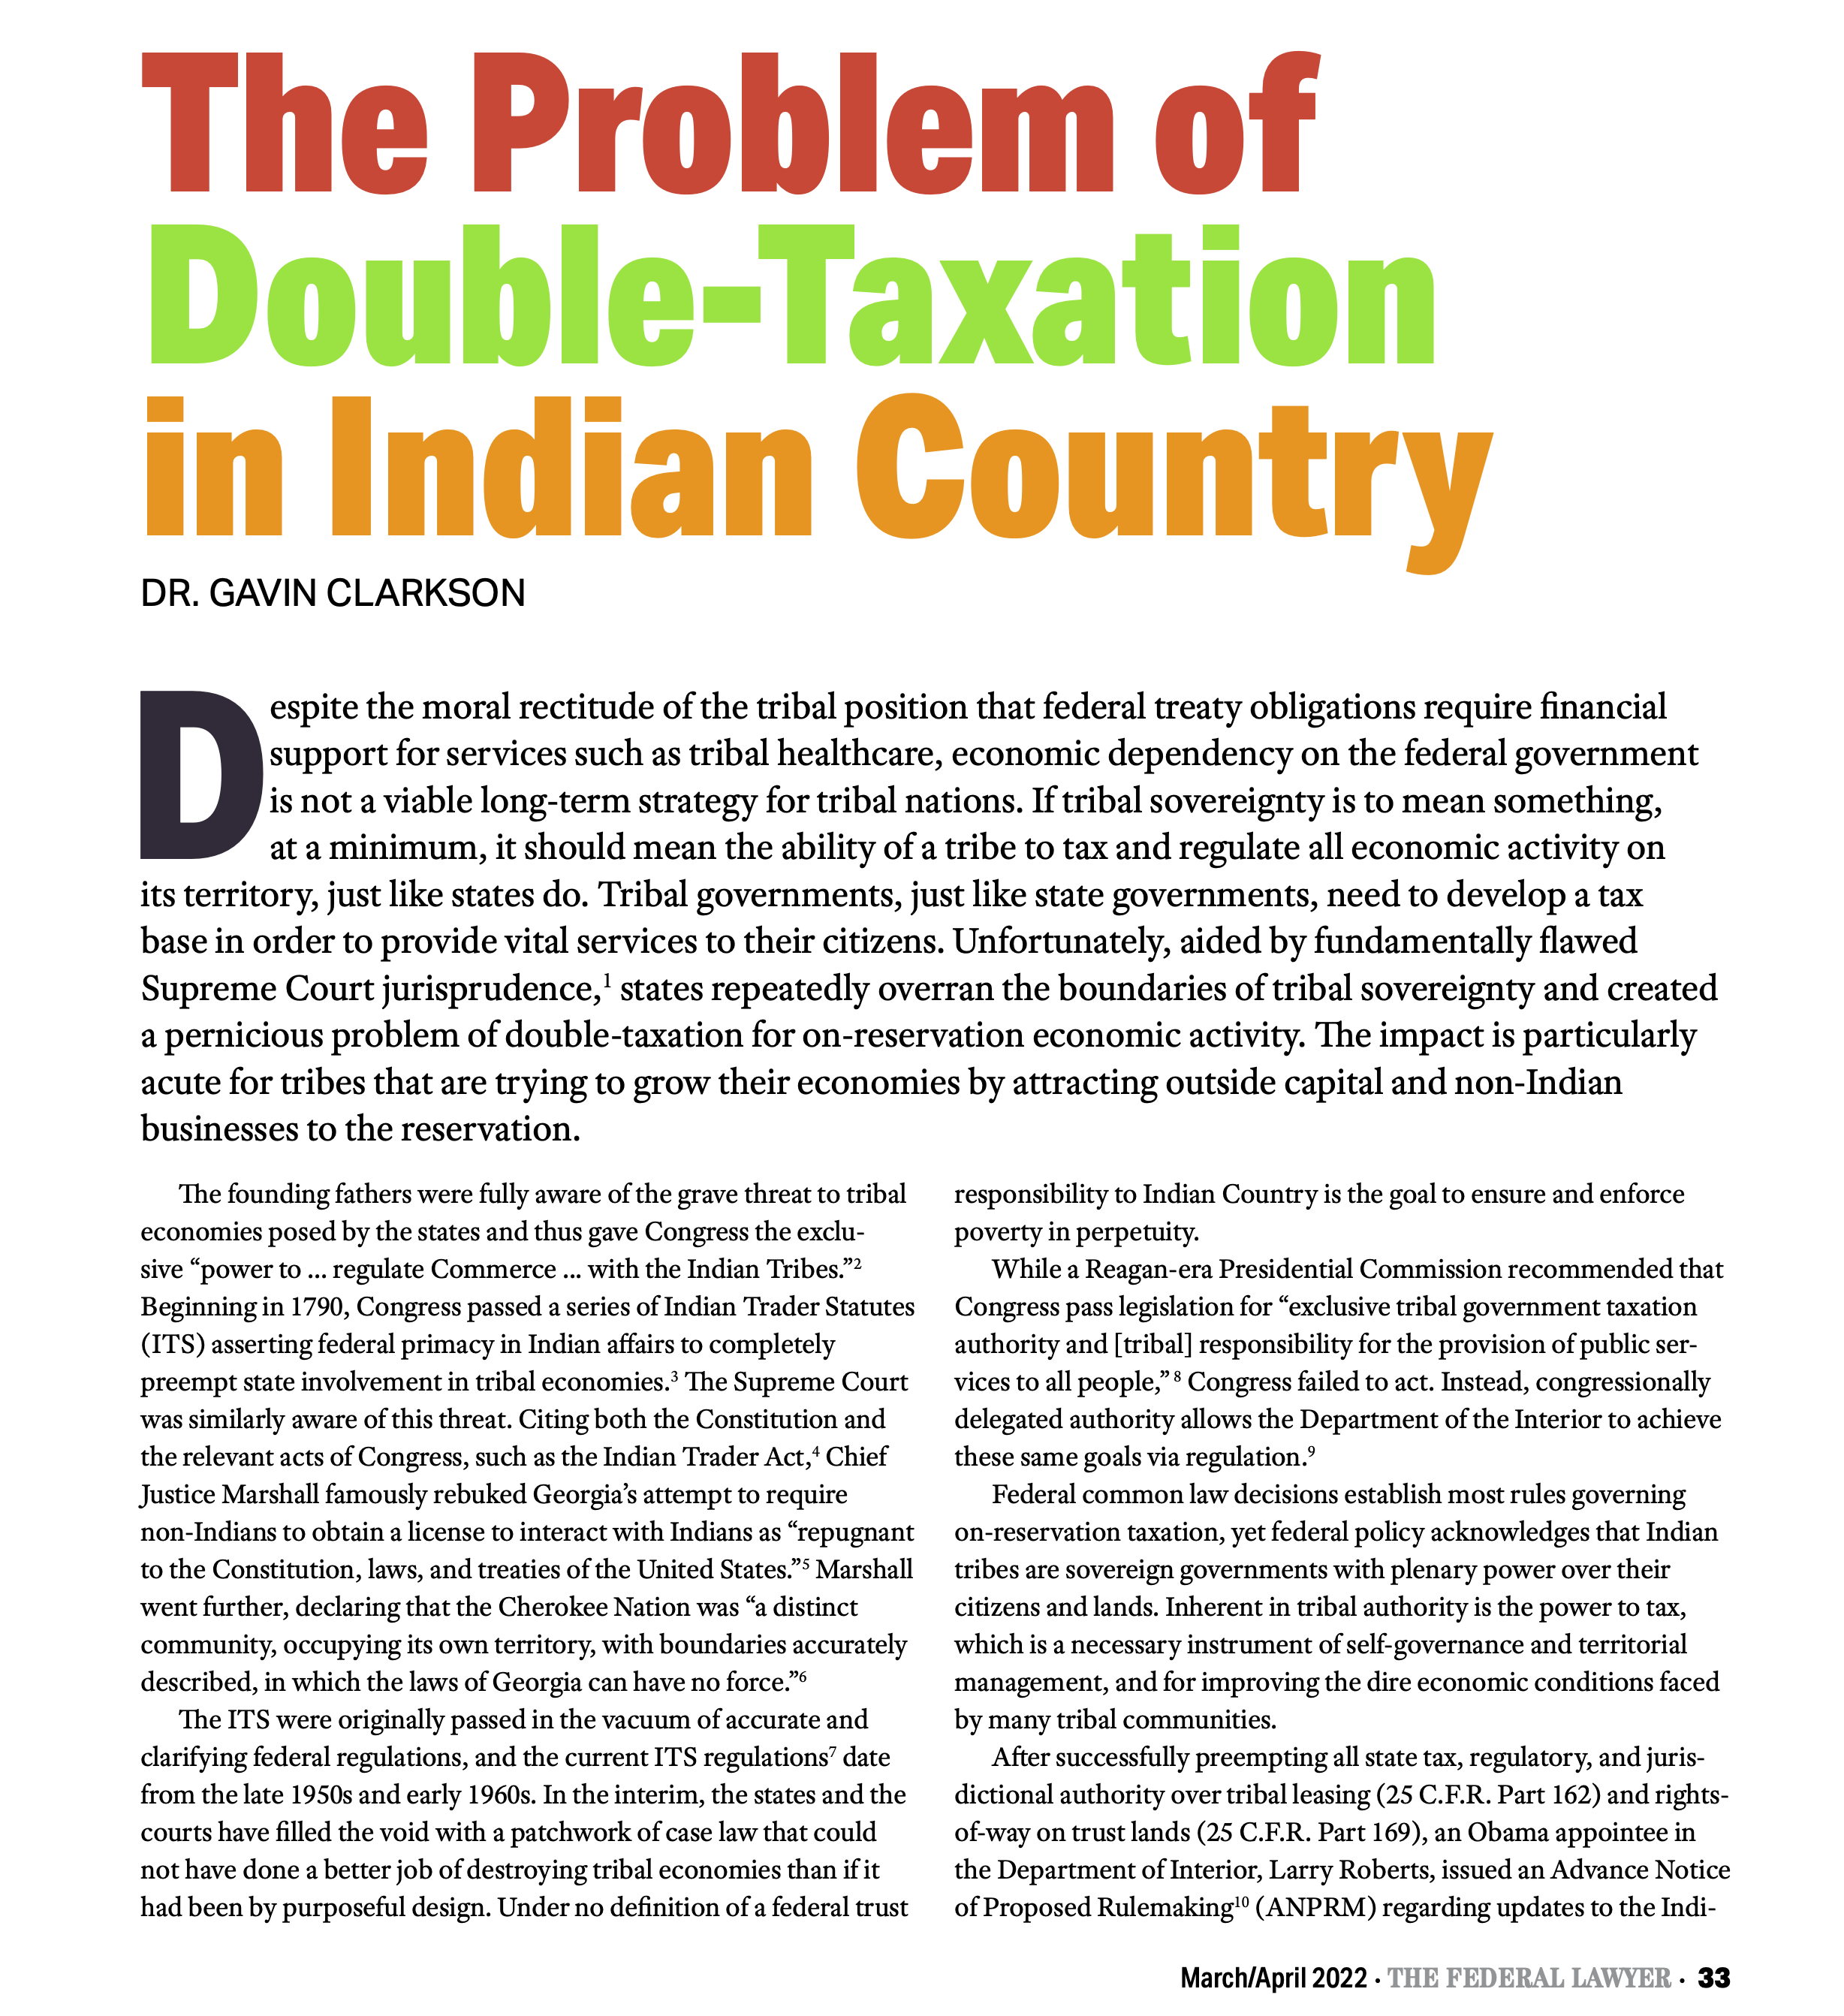 The Problem of Double-Taxation in Indian Country